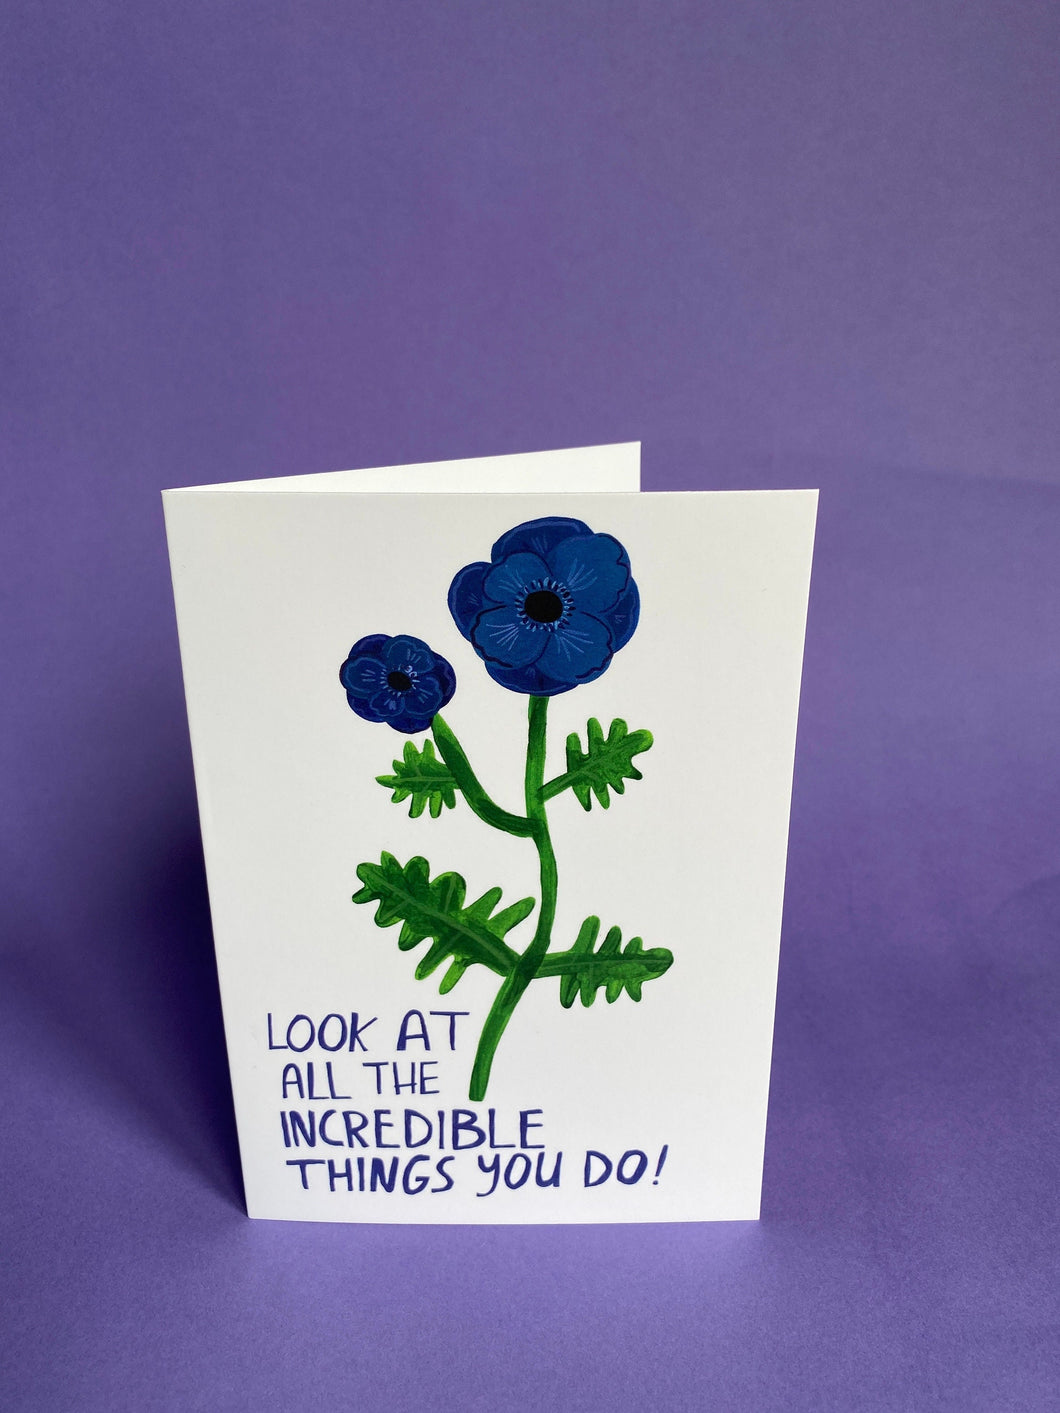 Look at all the incredible things you do! - Motivational Poppy flower A6 Greeting card - illustration - Fernandes Makes